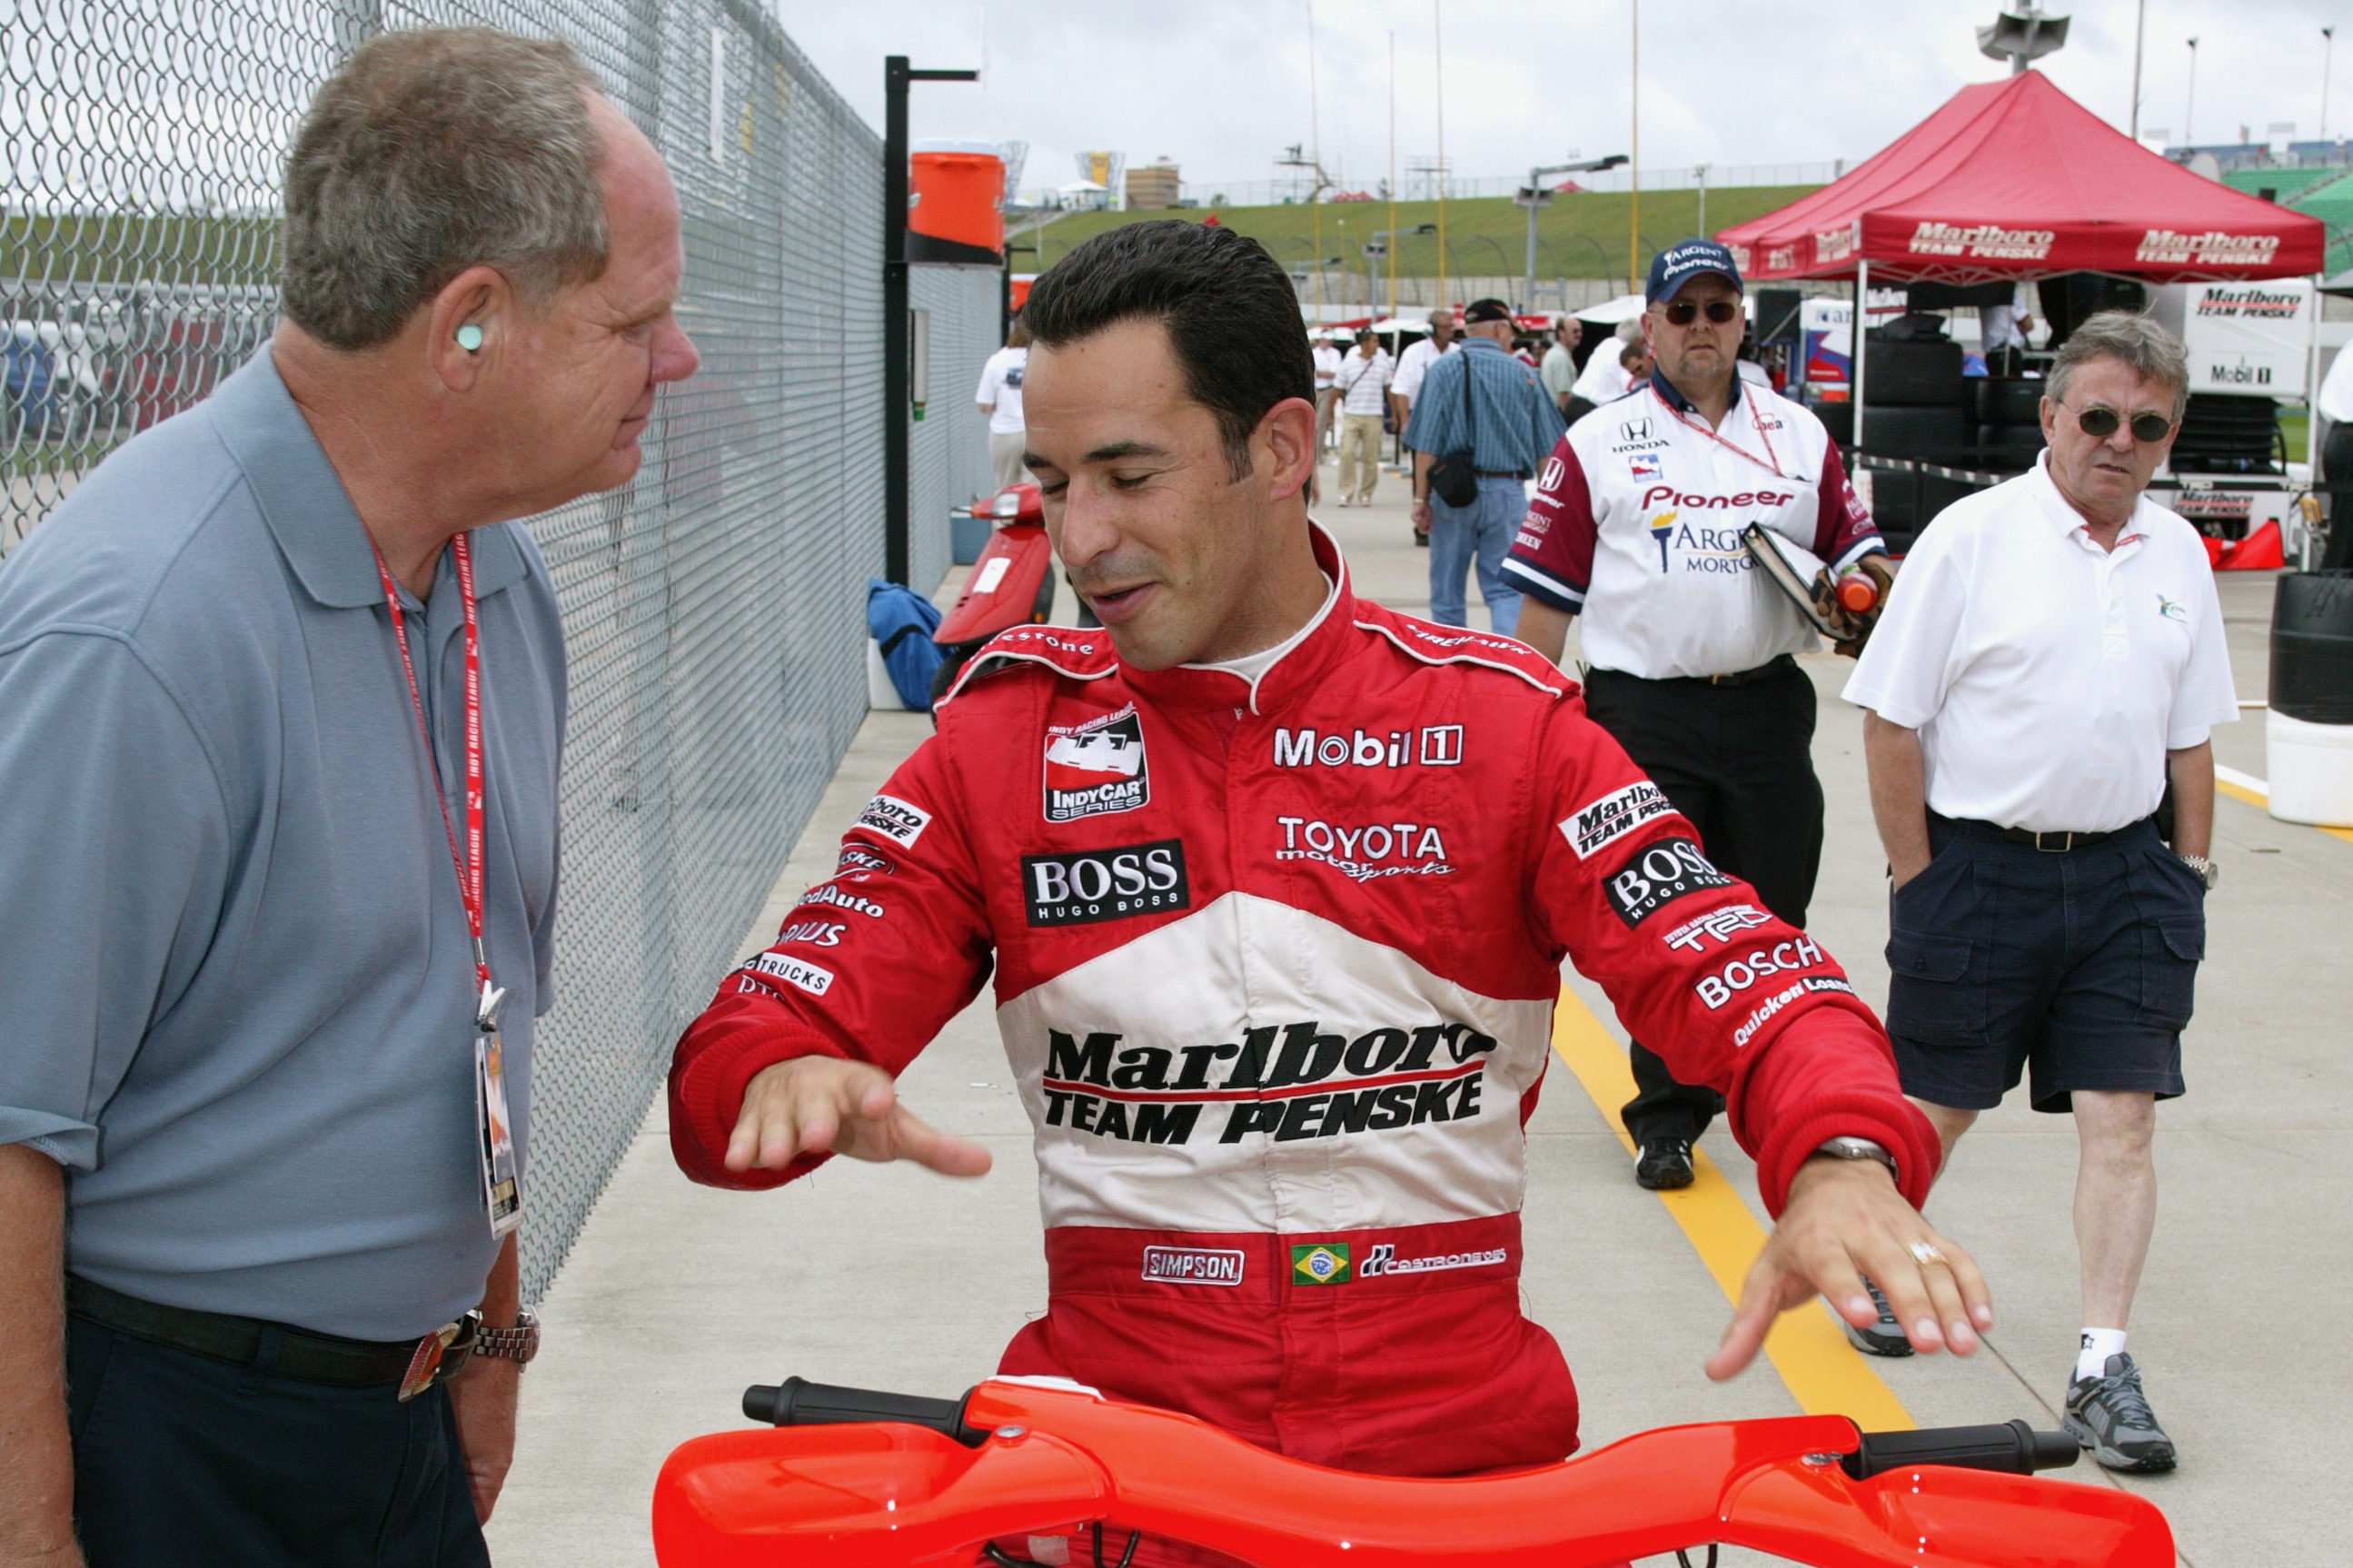 Paul Page Castroneves